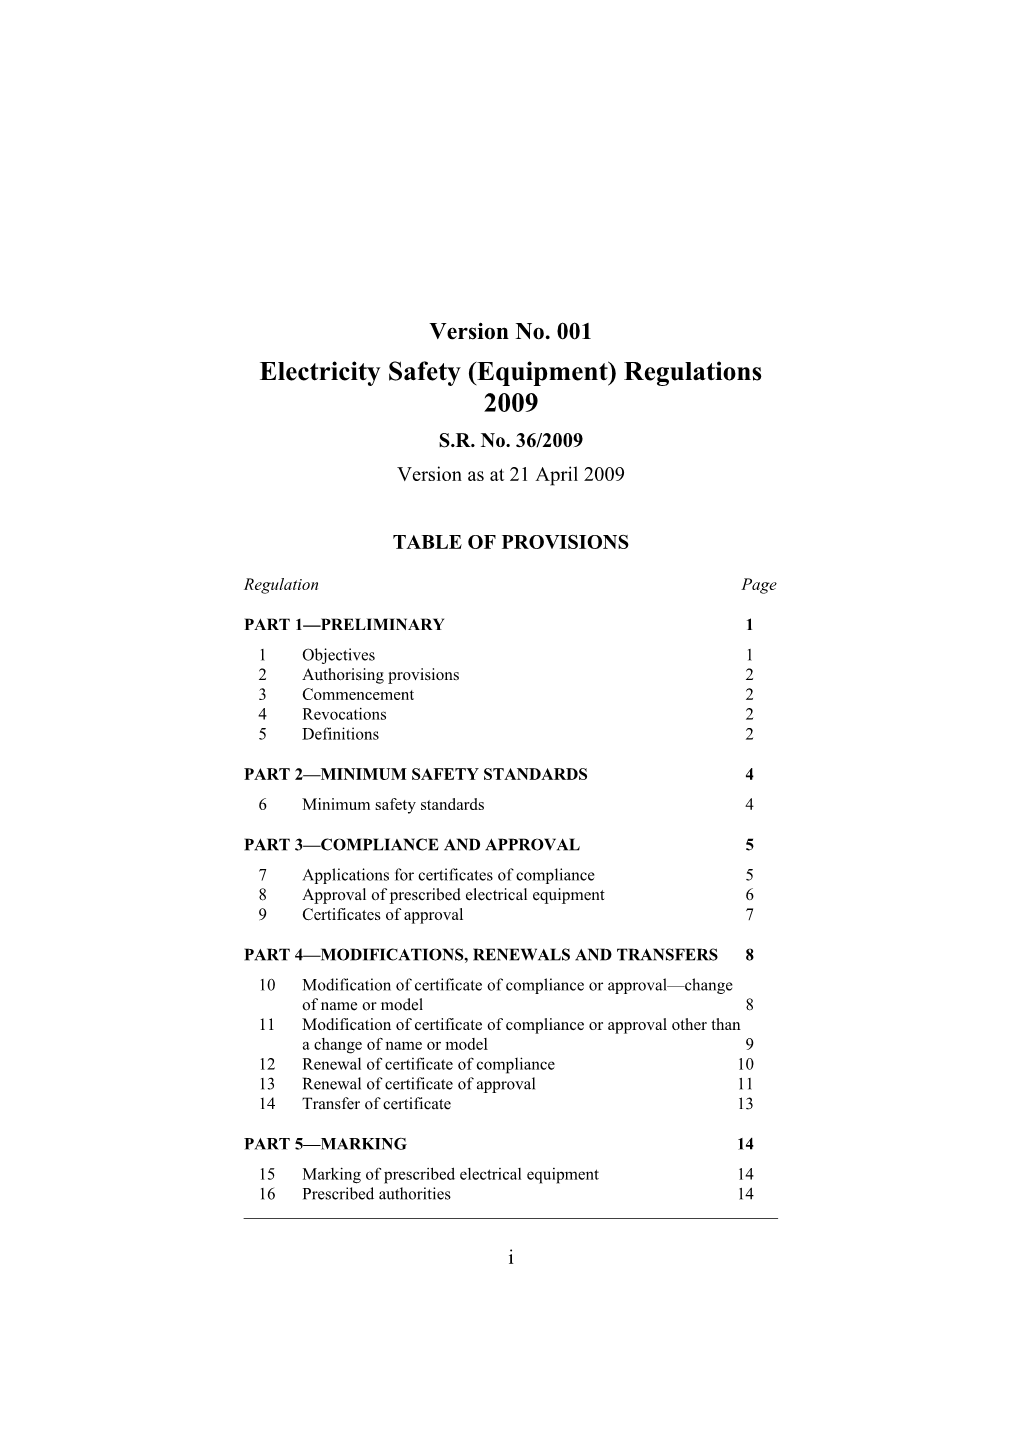 Electricity Safety (Equipment) Regulations 2009